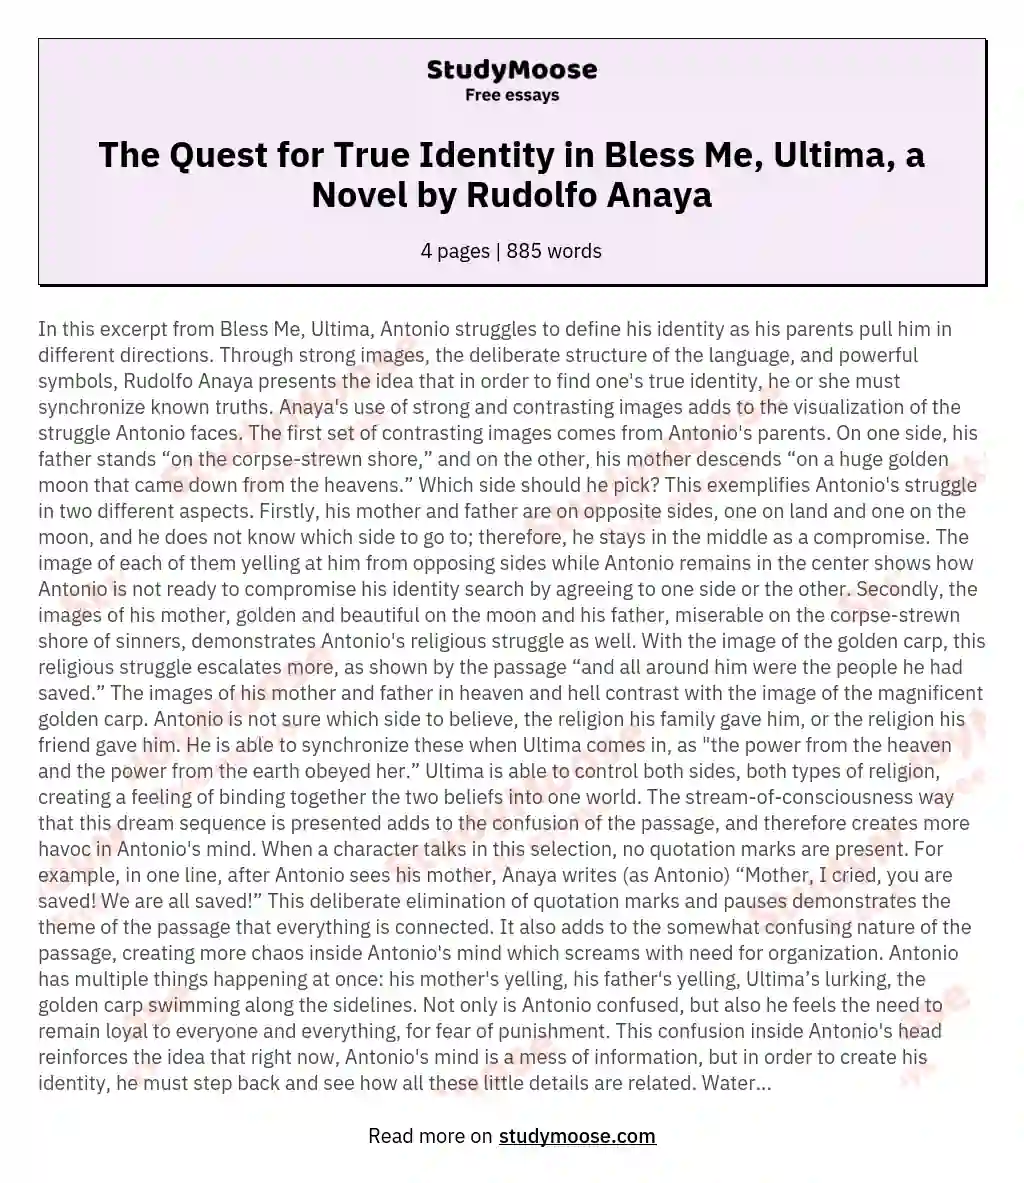 The Quest for True Identity in Bless Me, Ultima, a Novel by Rudolfo Anaya essay